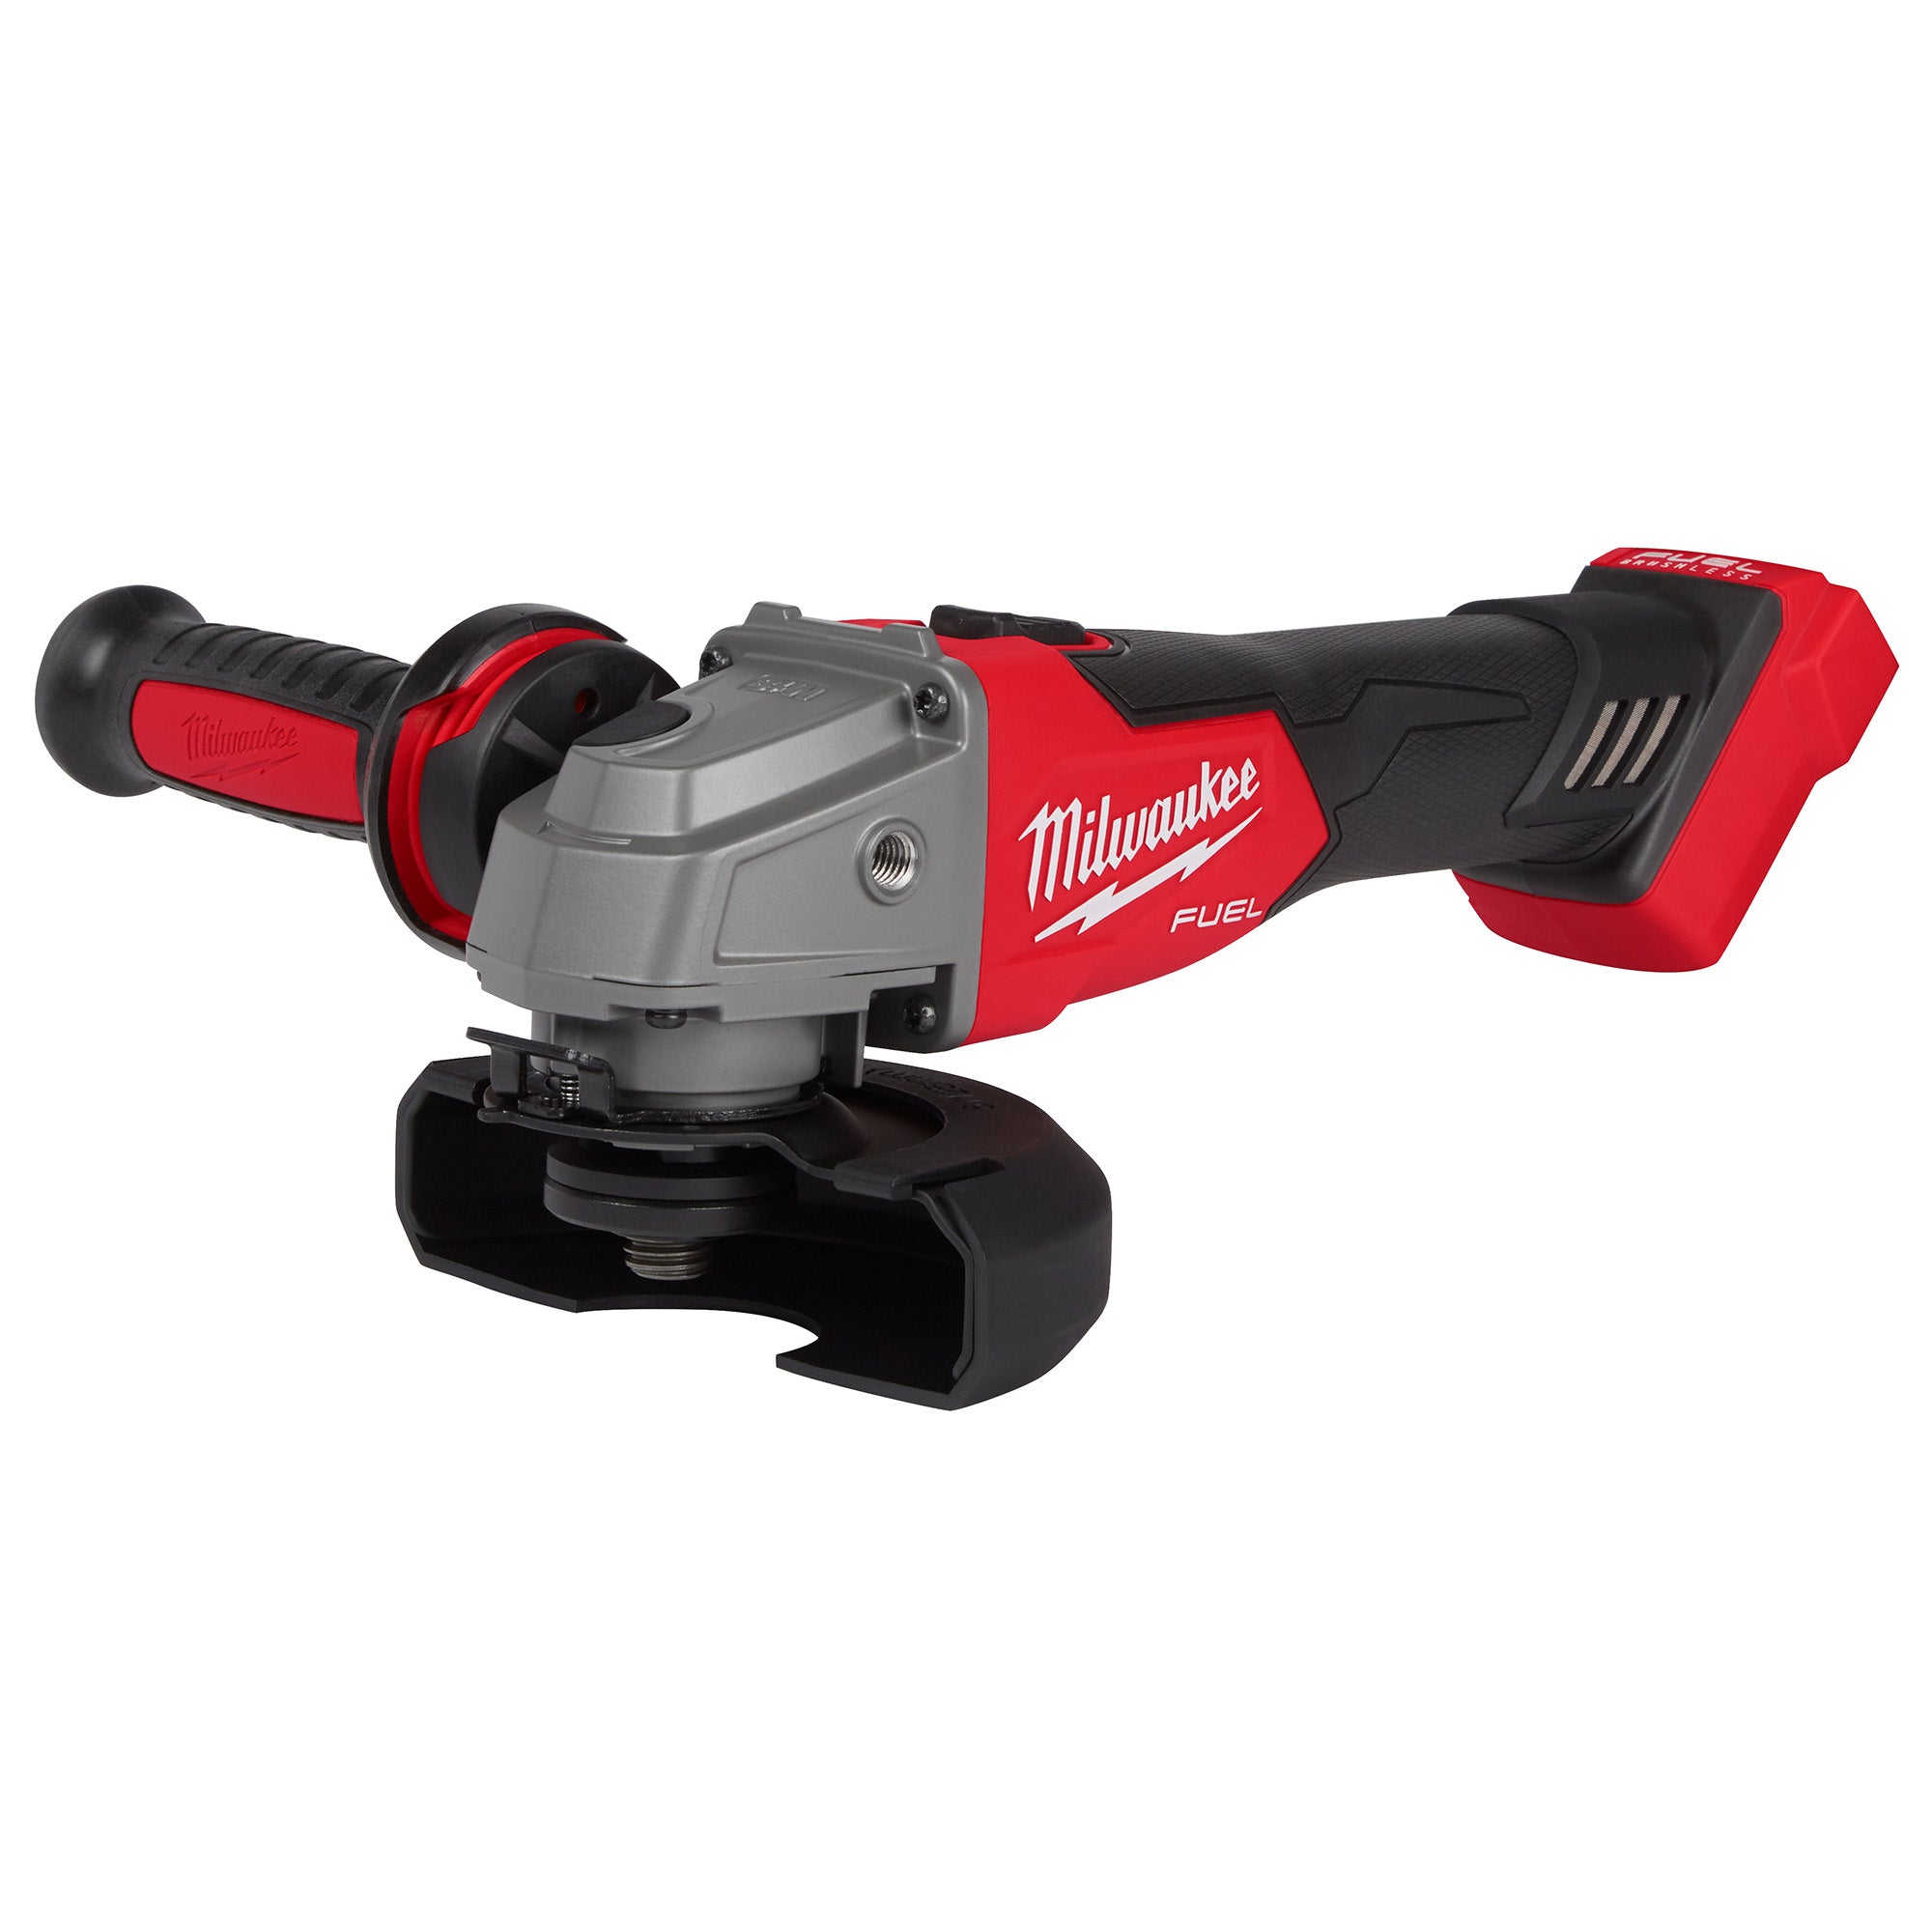 18V M18 FUEL Lithium-Ion Brushless Cordless 4-1/2" / 5" Grinder Slide Switch, Lock-On (Tool Only)